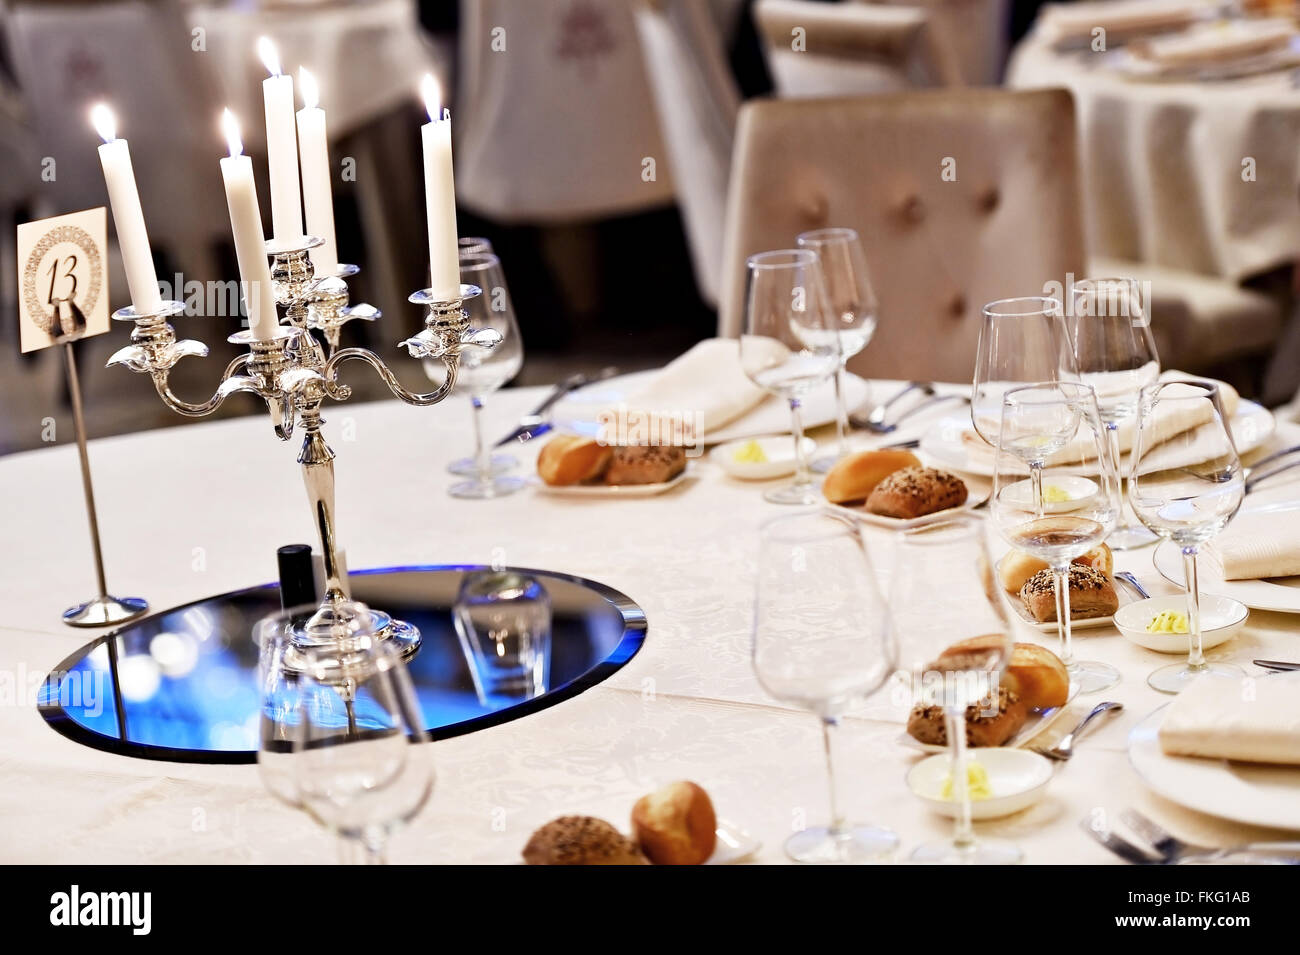 Candles burning in a chandelier on elegant dinner table Stock Photo